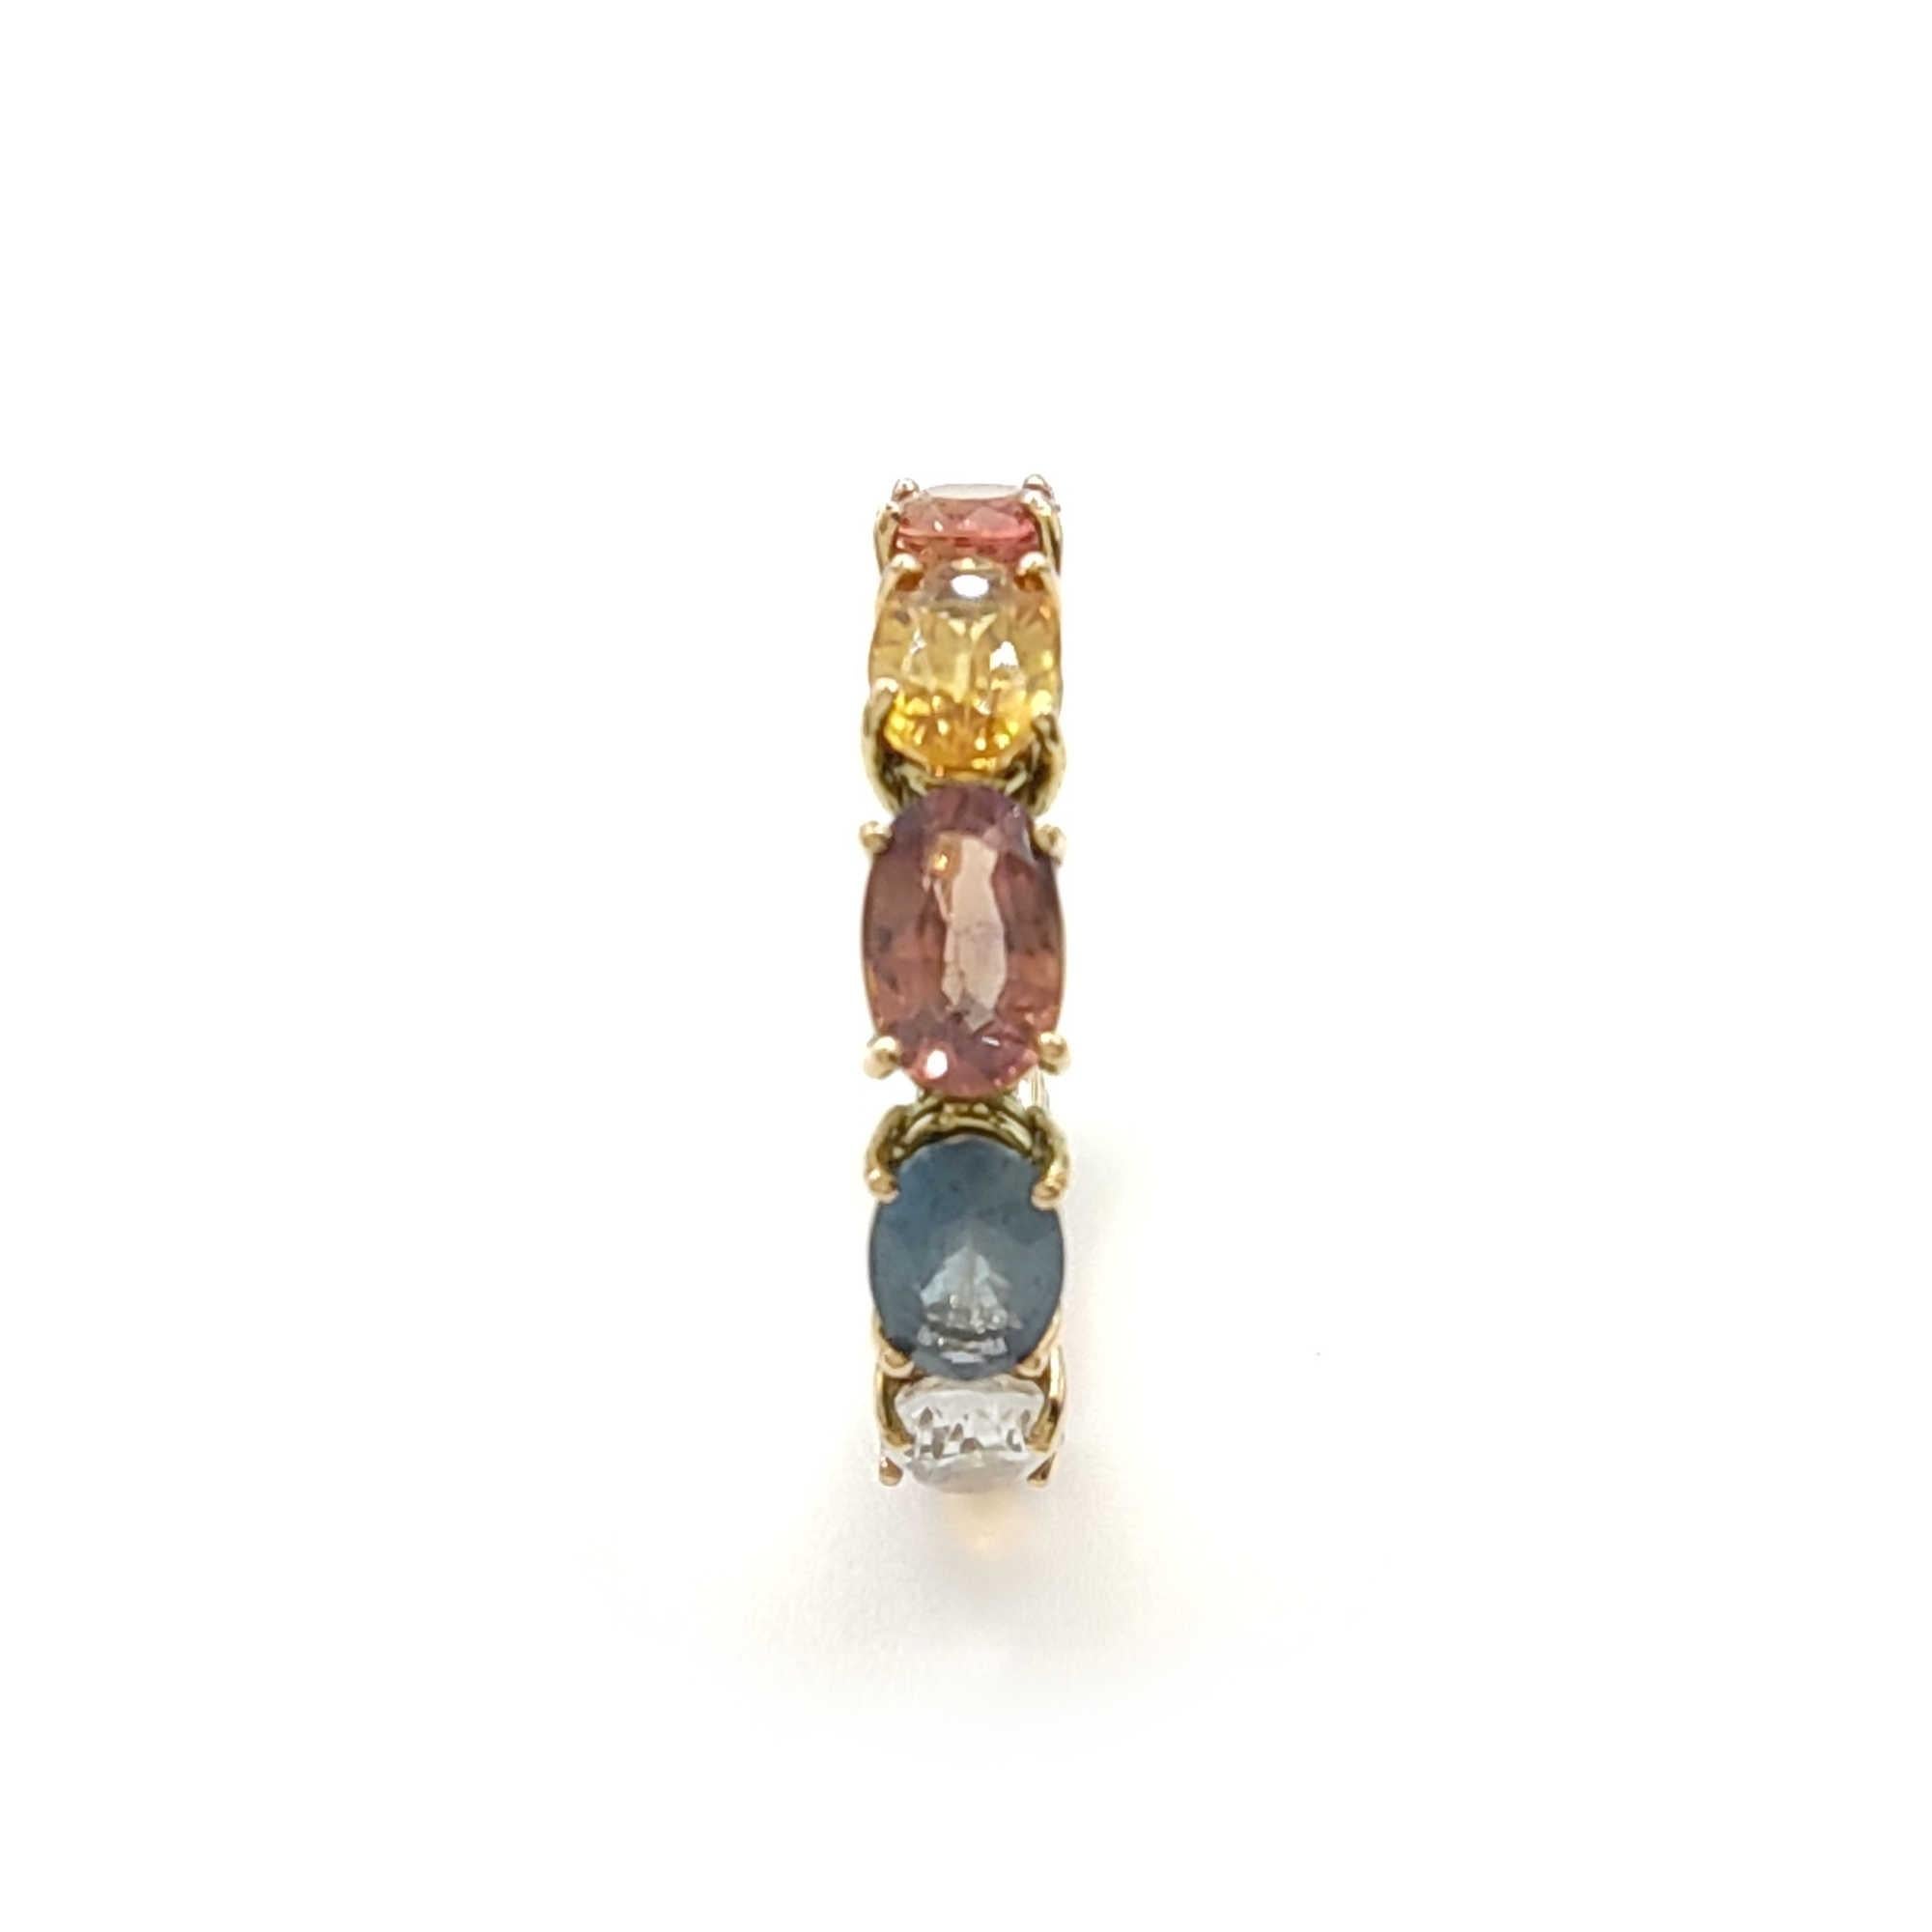 Discover the allure of our unique handcrafted 14kt yellow gold ring, adorned with exquisite heat-treated sapphires totaling 6.41ct. Certified by the Spanish Gemological Institute, this piece combines timeless elegance and modern craftsmanship. Ideal